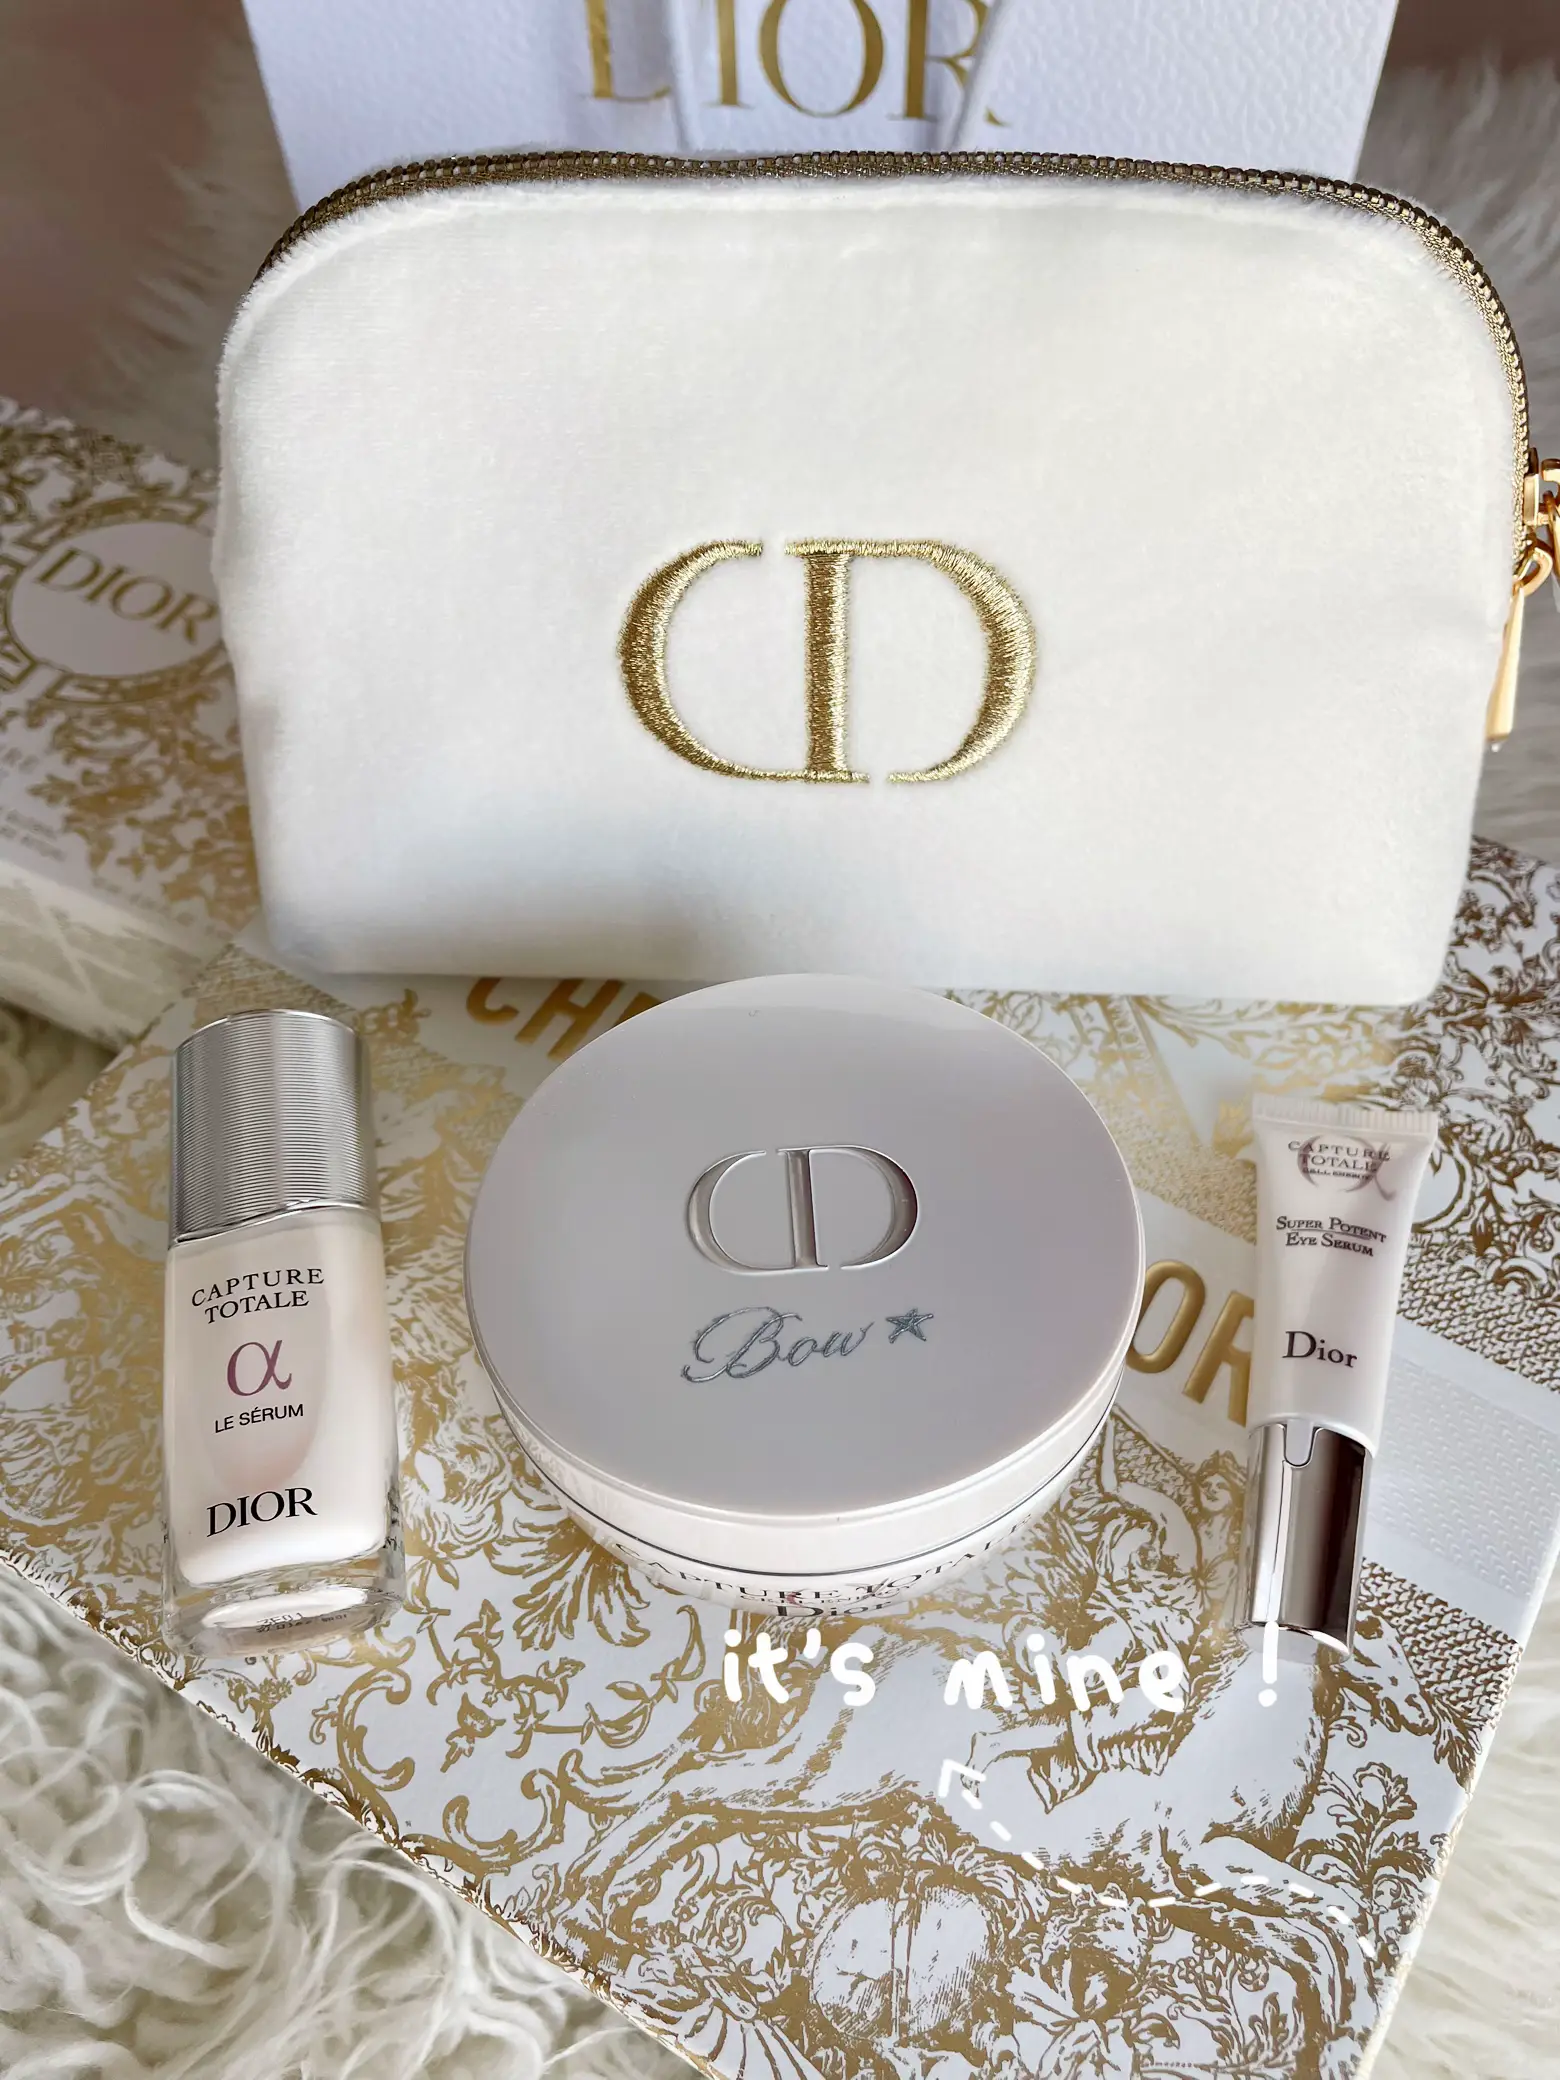 ⭐Dior skincare set worth rebuying ⭐, Gallery posted by BORA